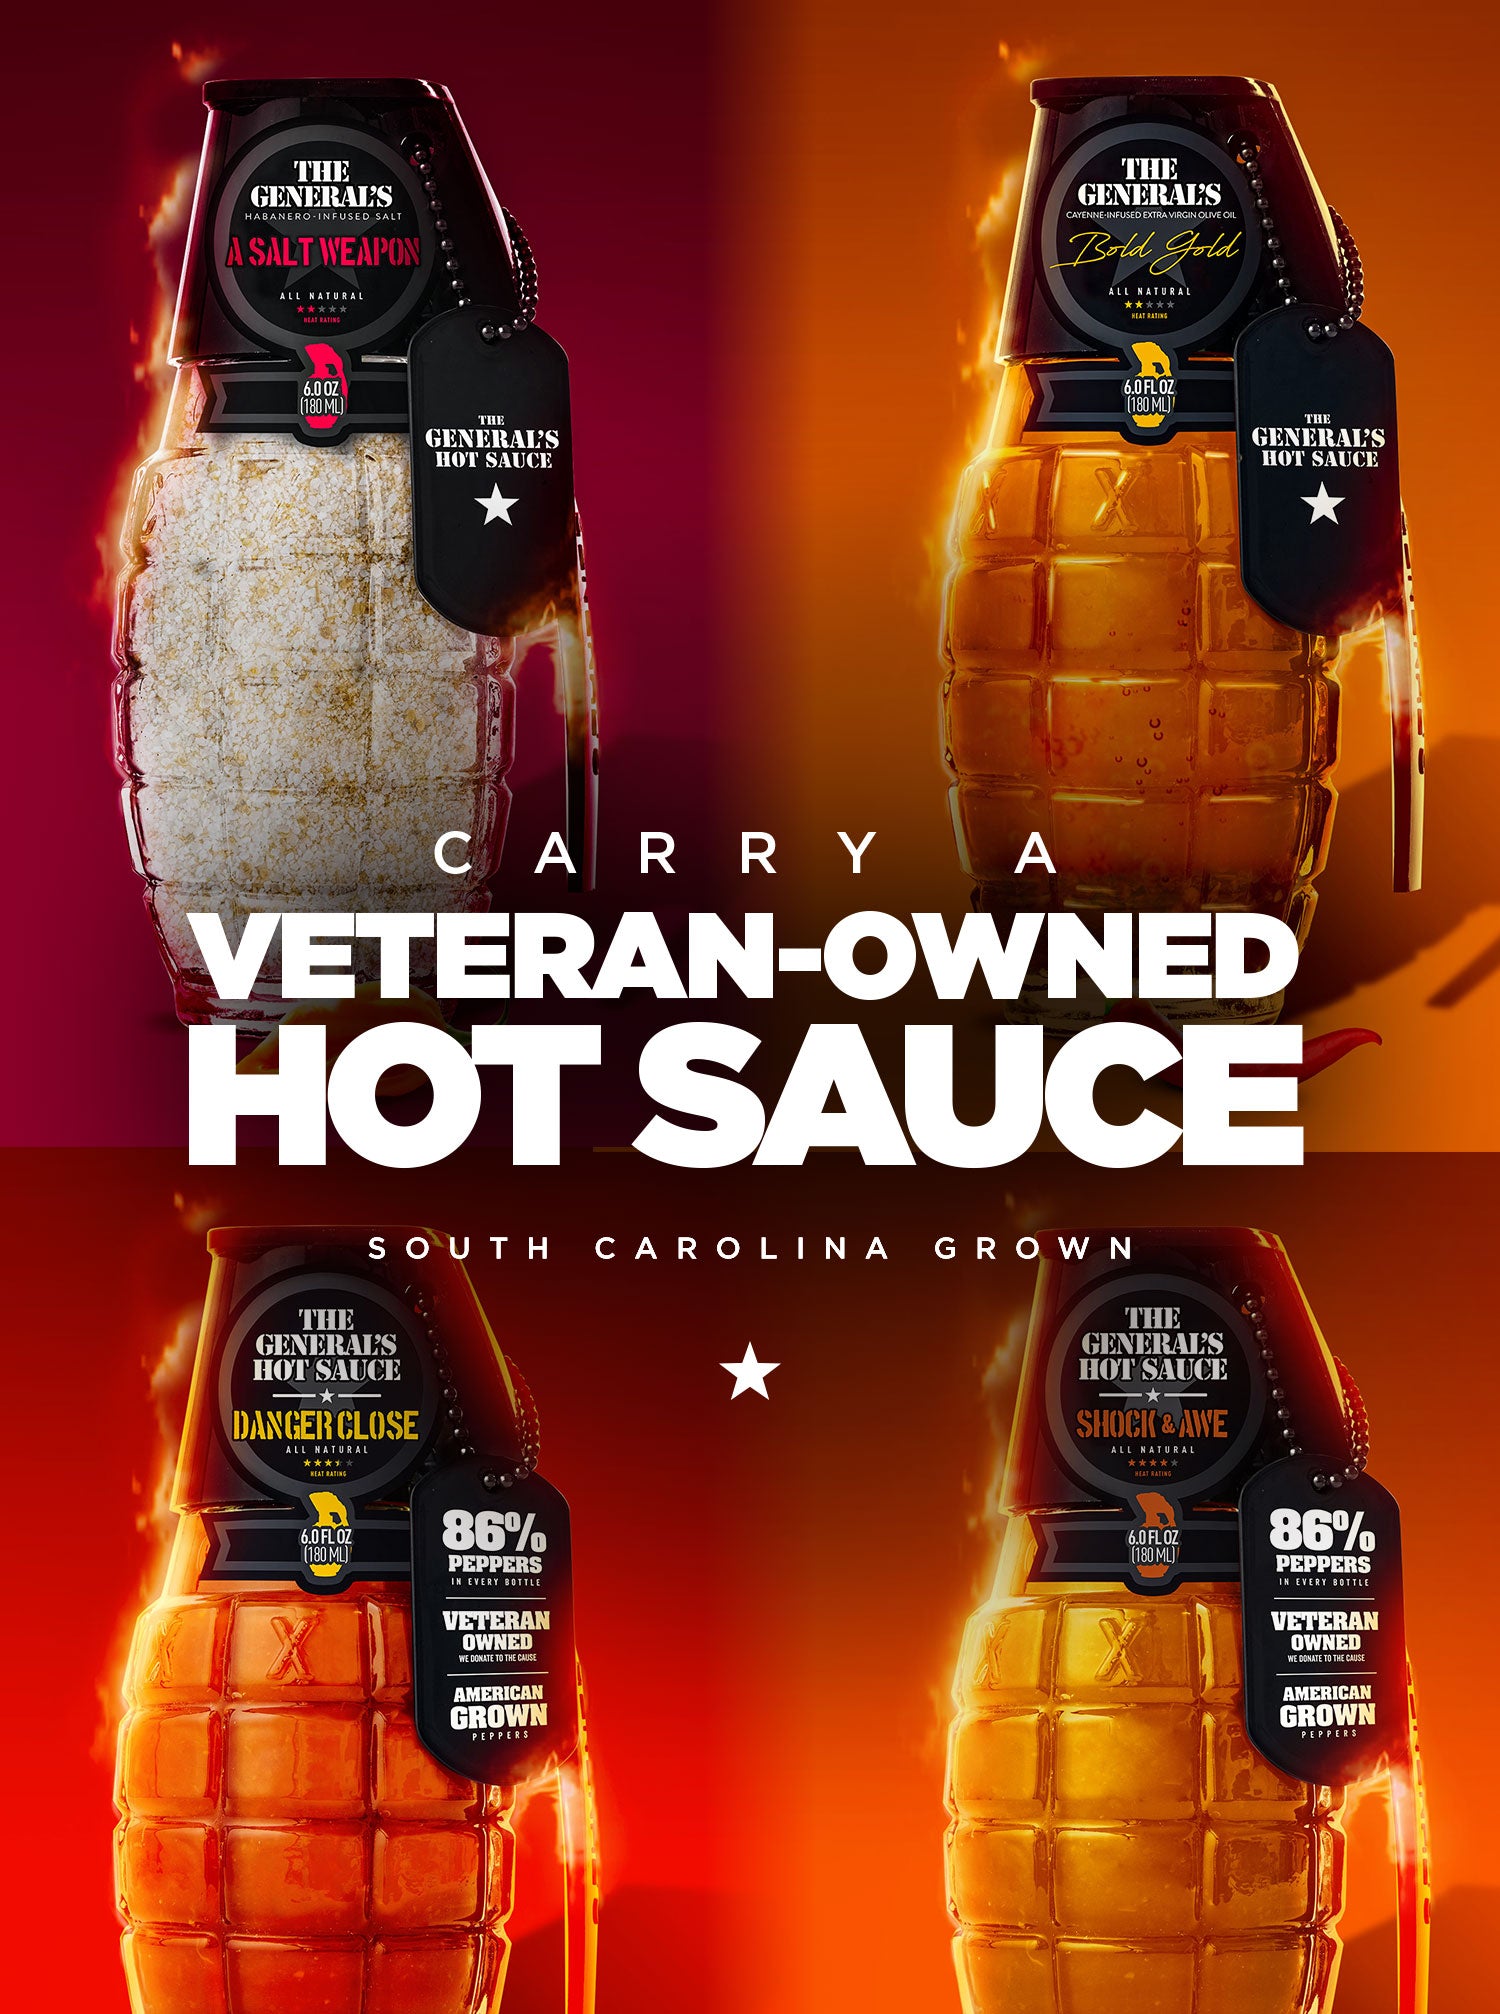 Carry a veteran-owned hot sauce